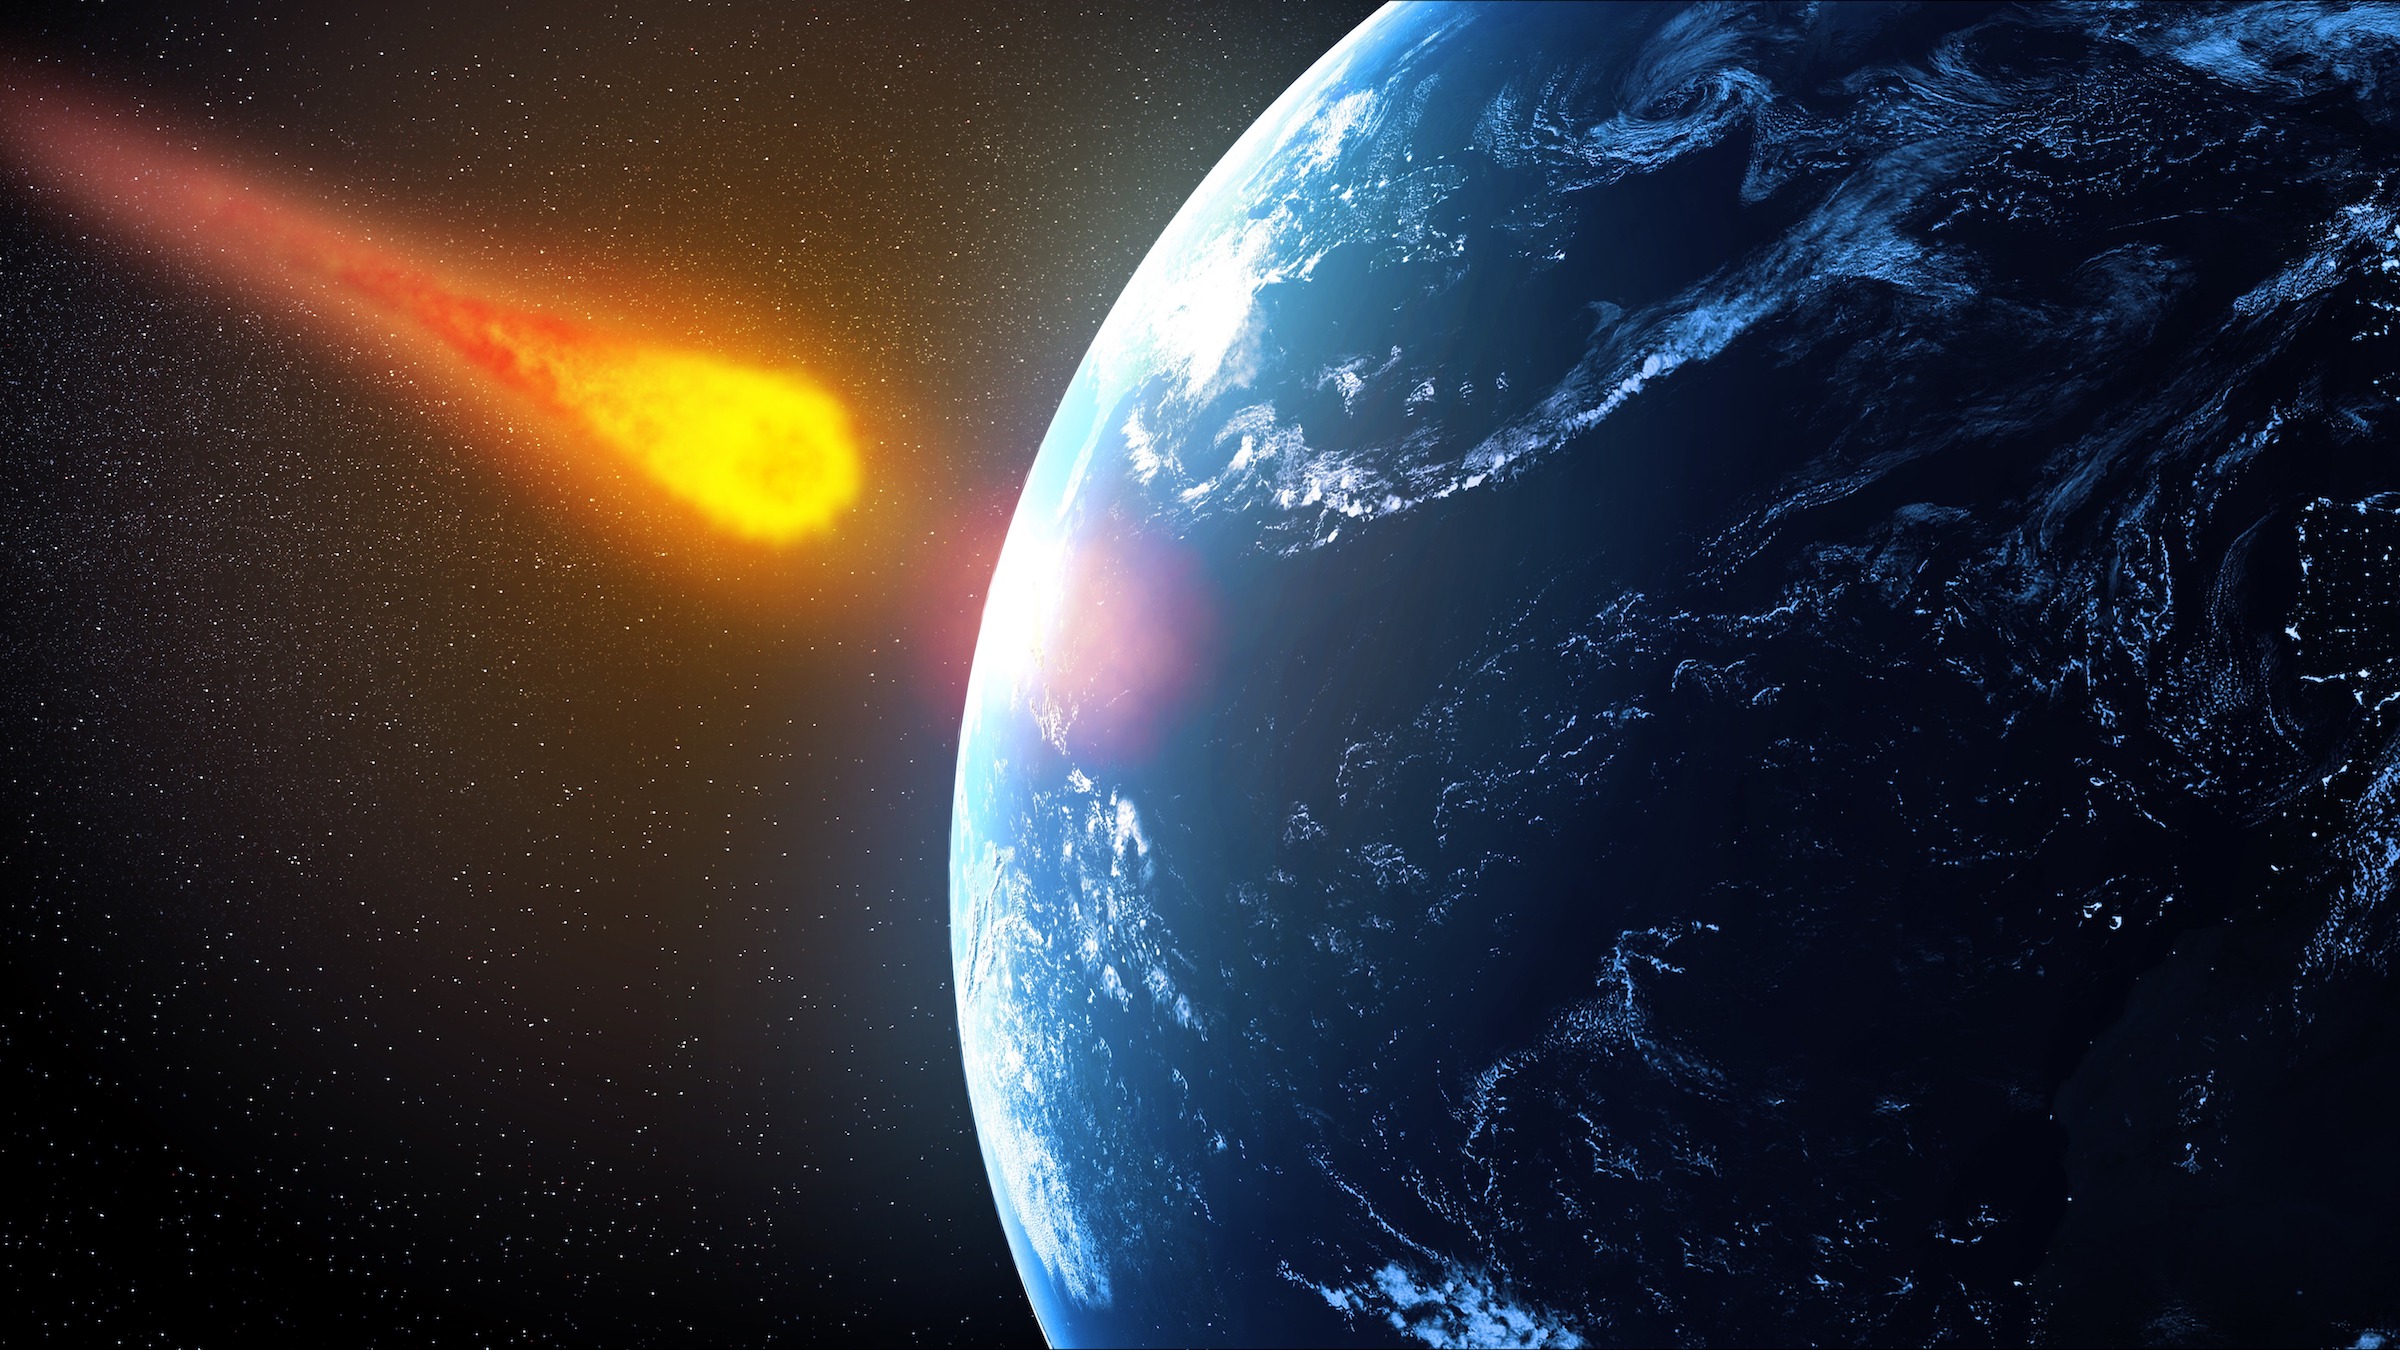 Illustration of an asteroid slamming into Earth